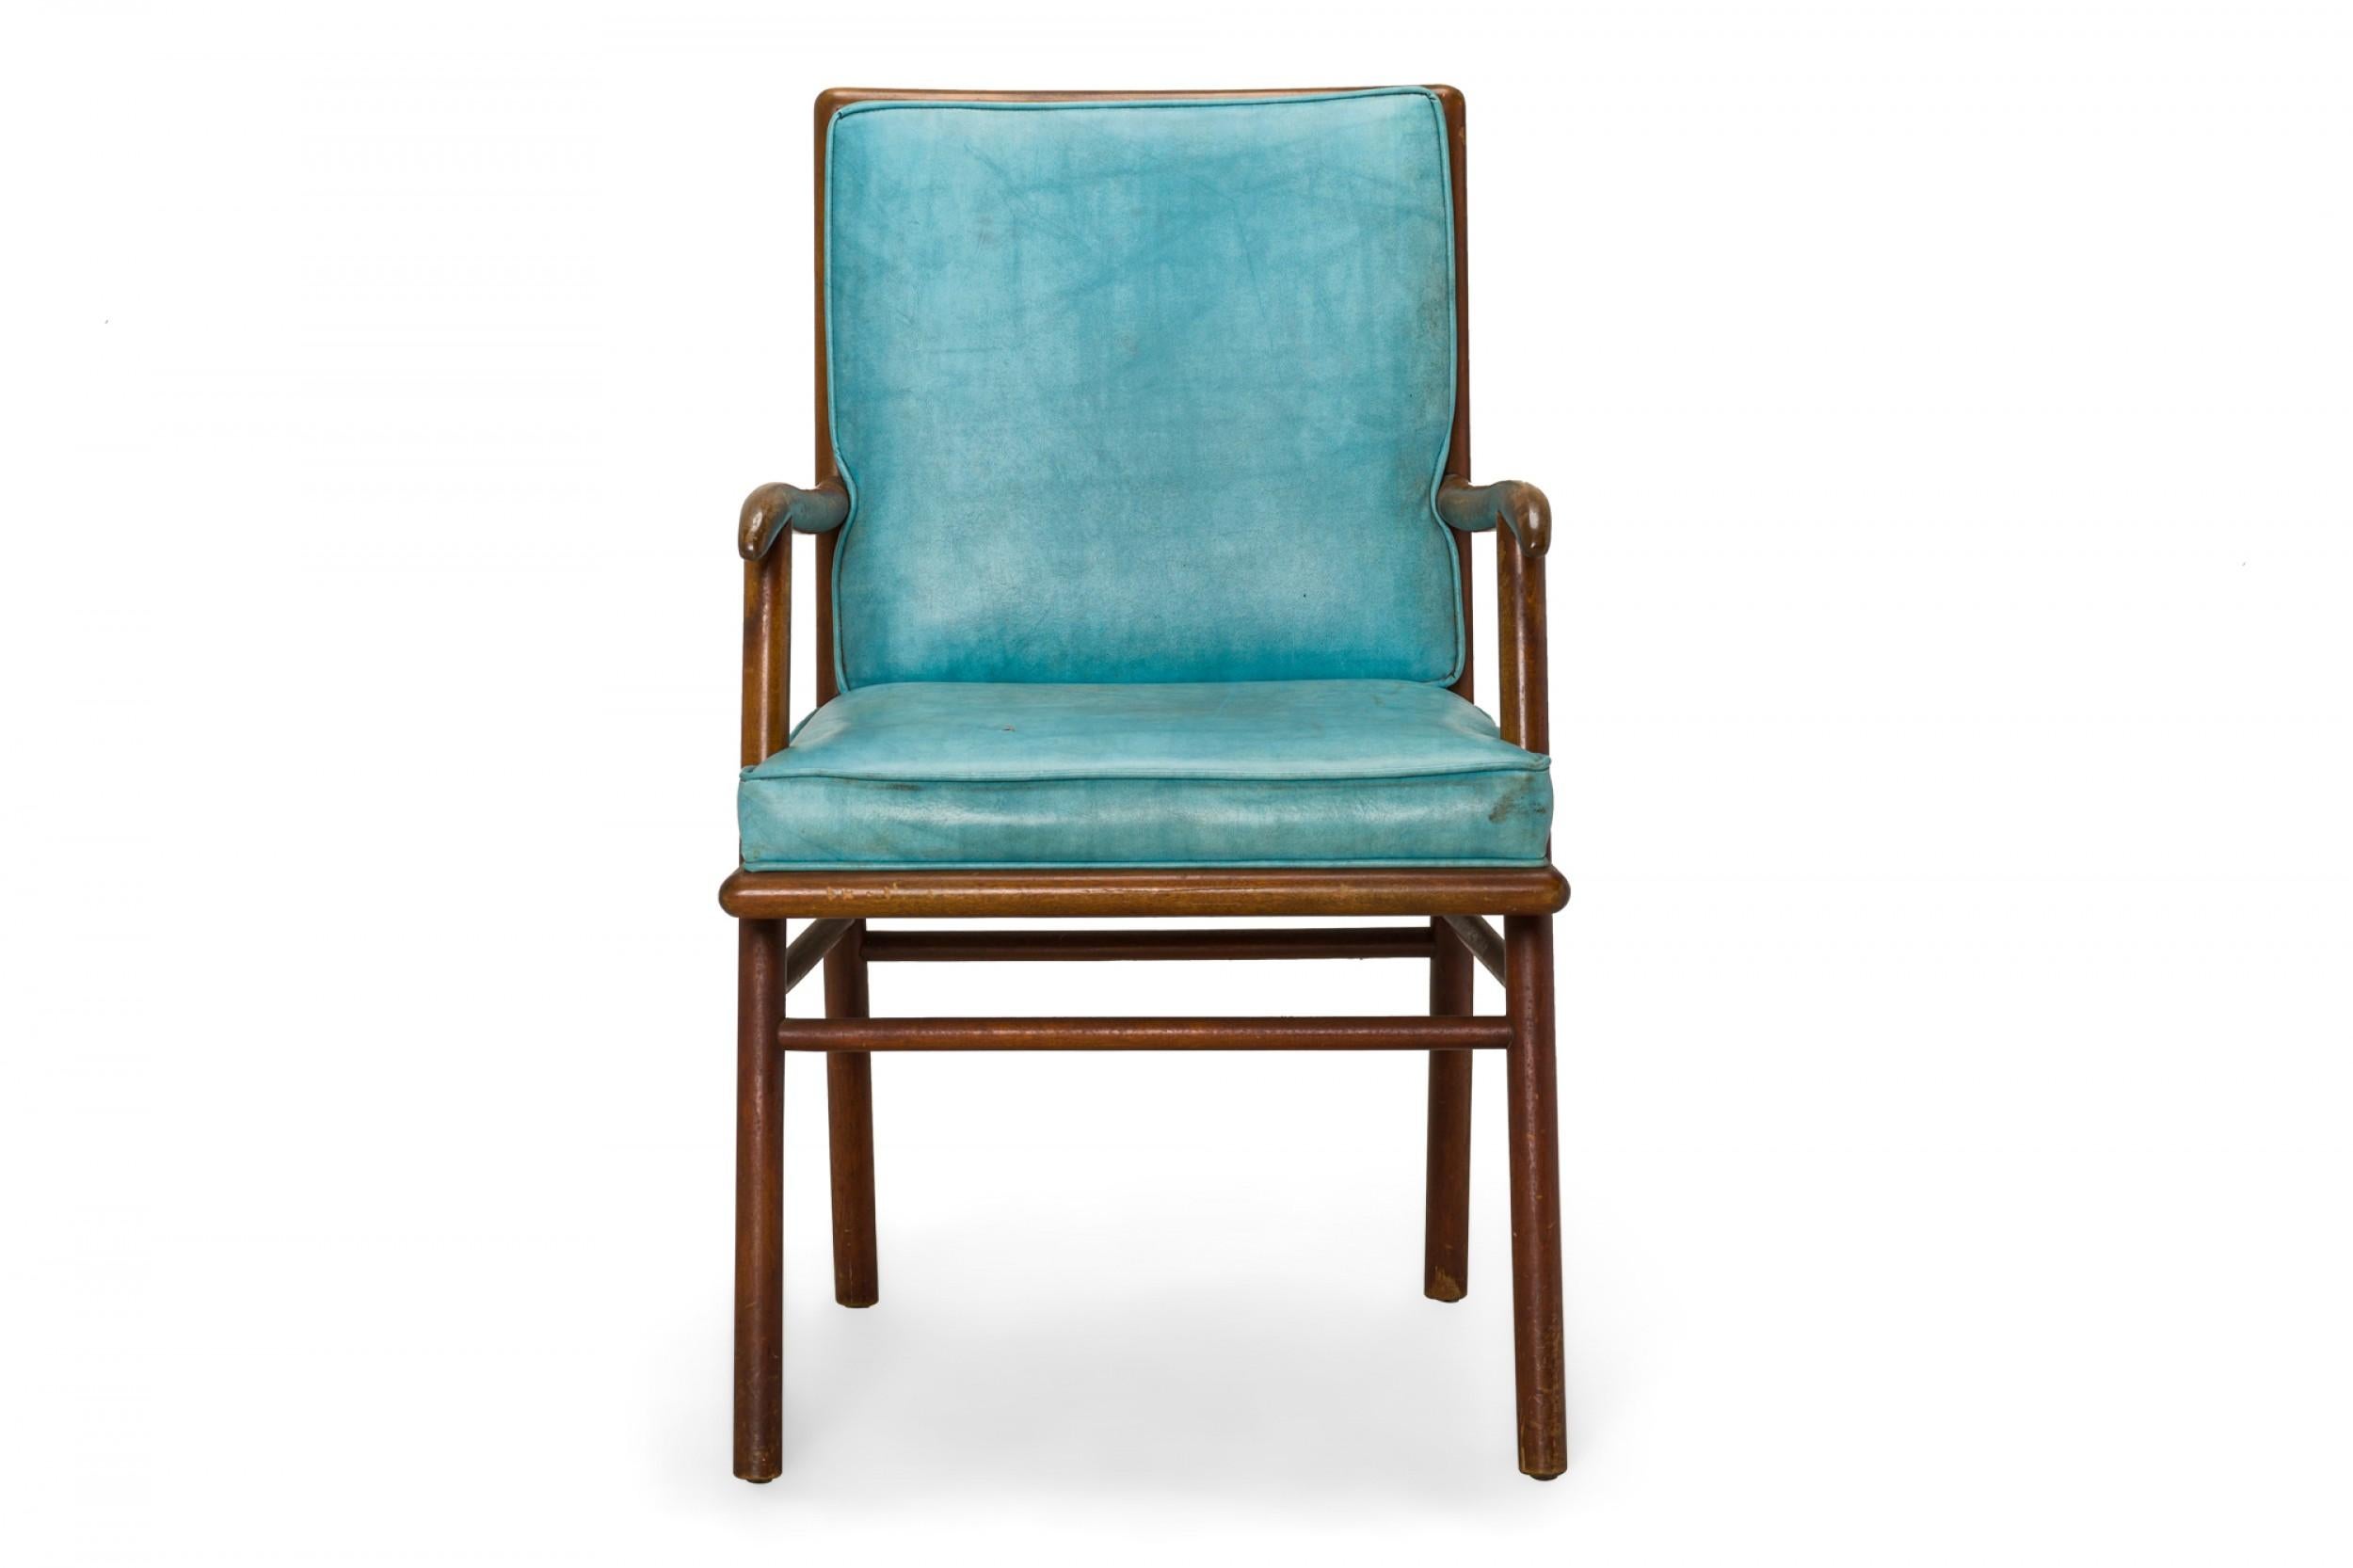 American Mid-Century dining armchair with a shaped walnut frame and bright blue vinyl upholstered seat and back cushions, resting on four angled dowel legs. (T.H. ROBSJOHN-GIBBINGS FOR WIDDICOMB FURNITURE COMPANY)
